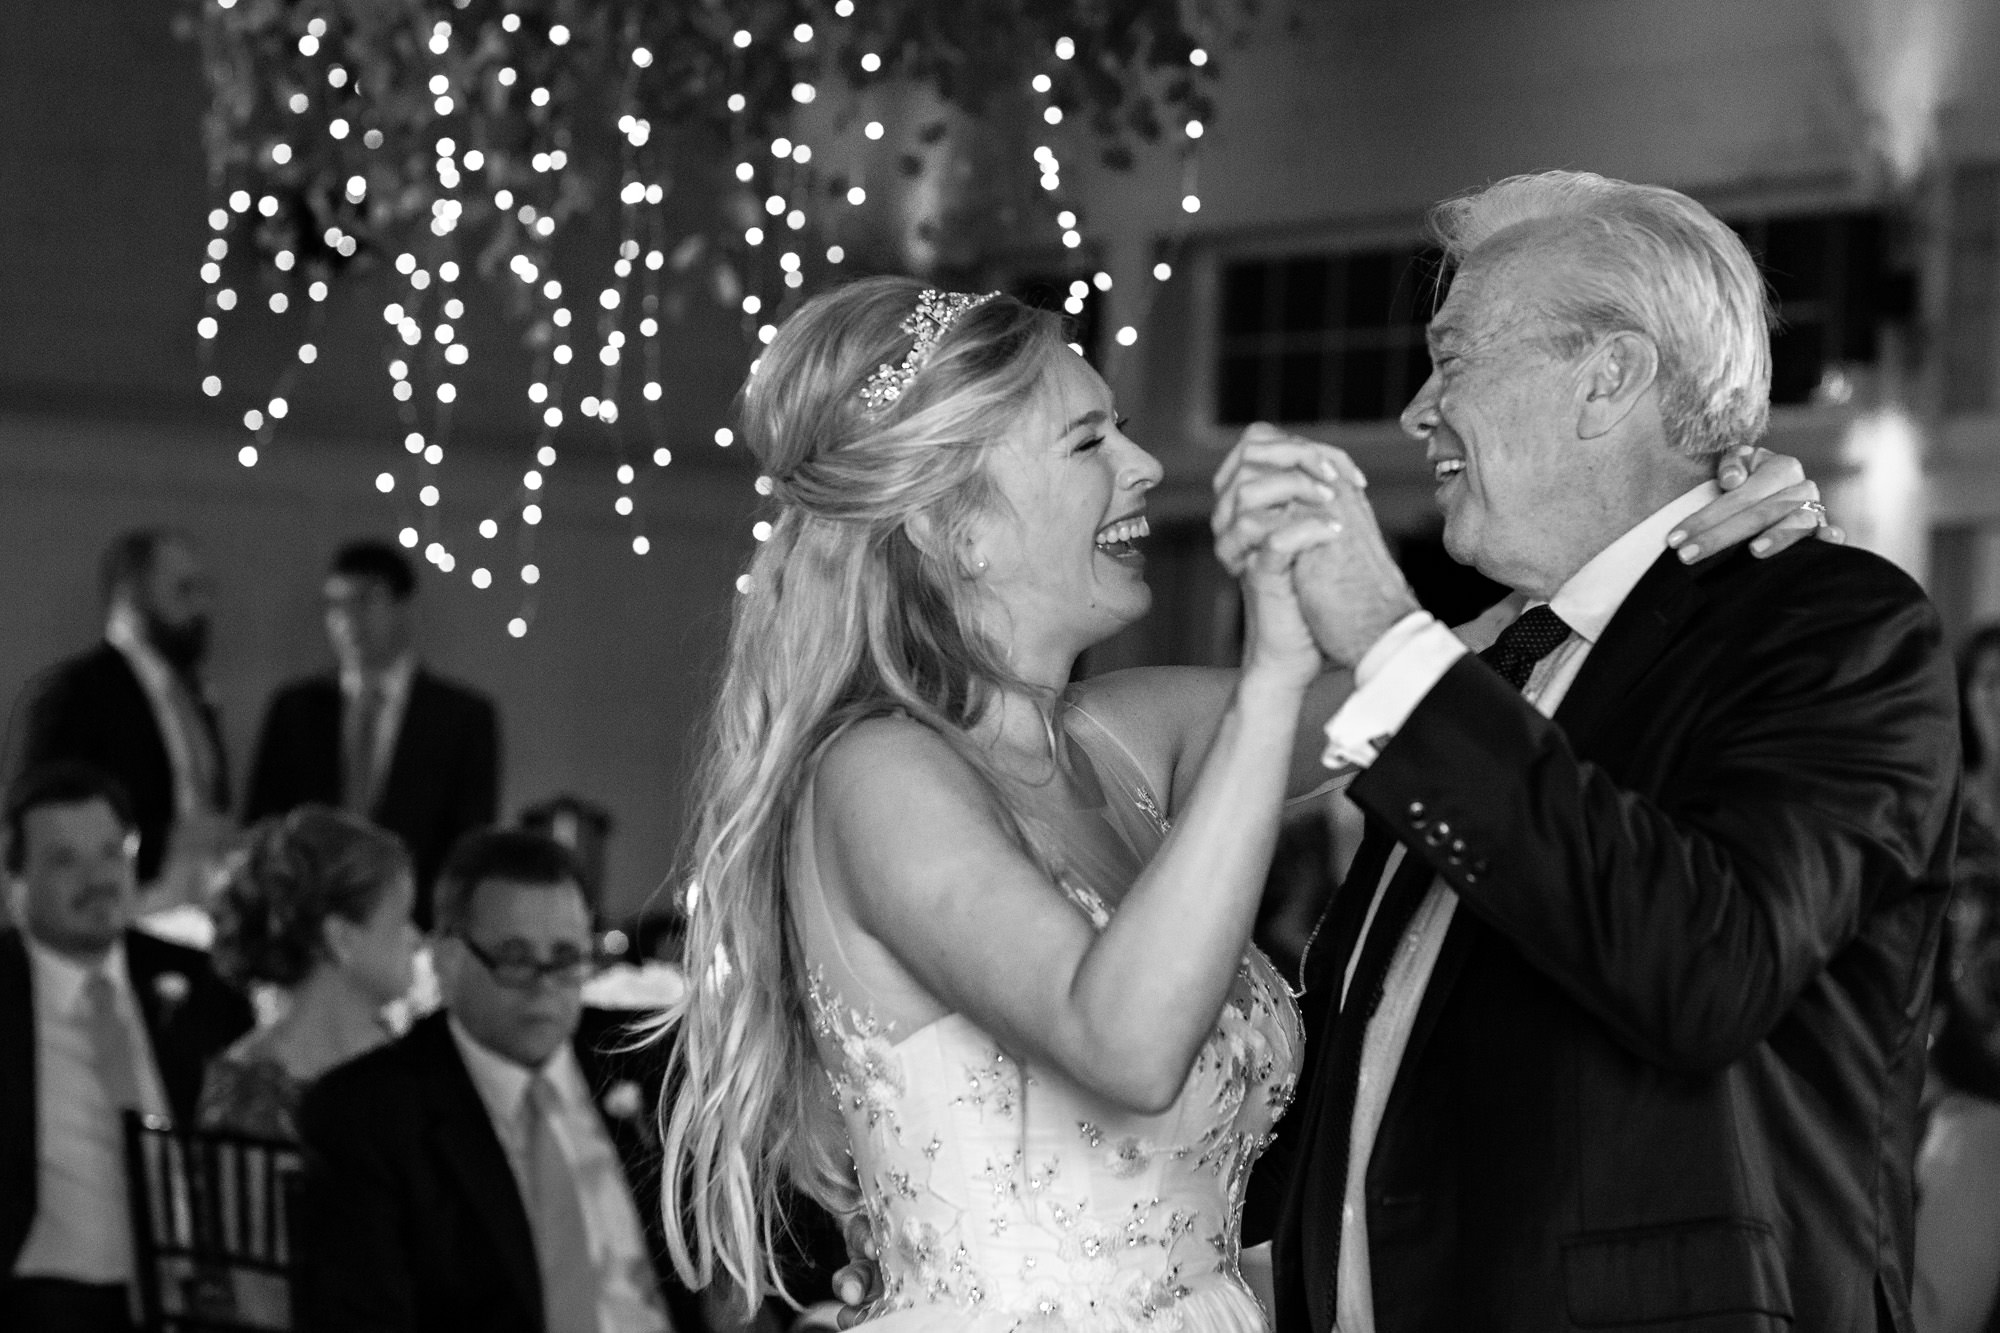 A happy first dance shared with the bride and her father at a Hidden Pond wedding.